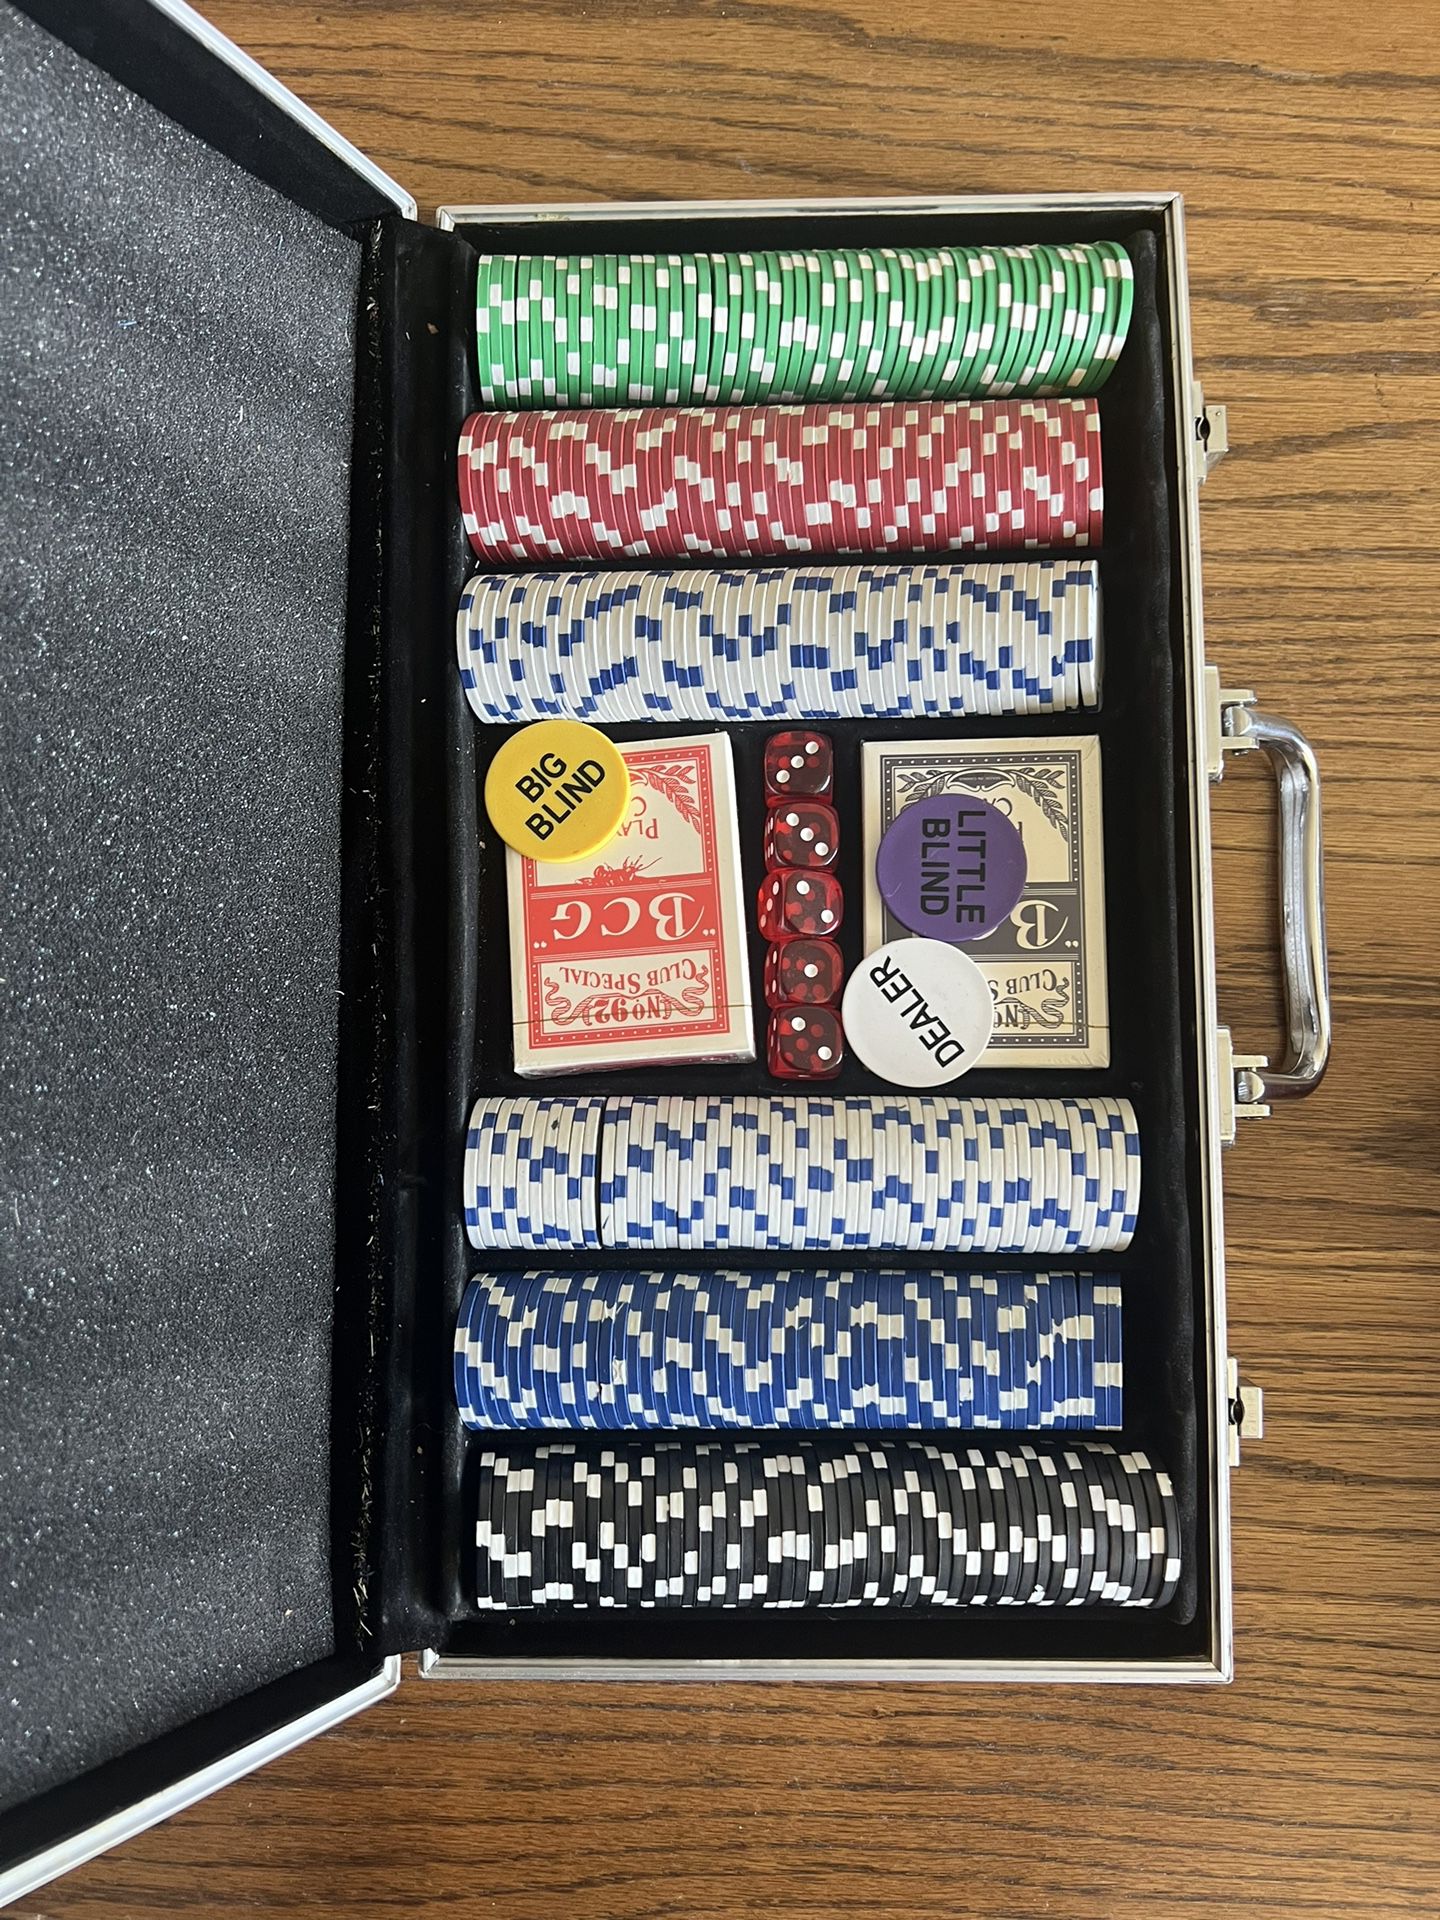 Poker Set w/ Chips, Dice, two sets of cards, and case.